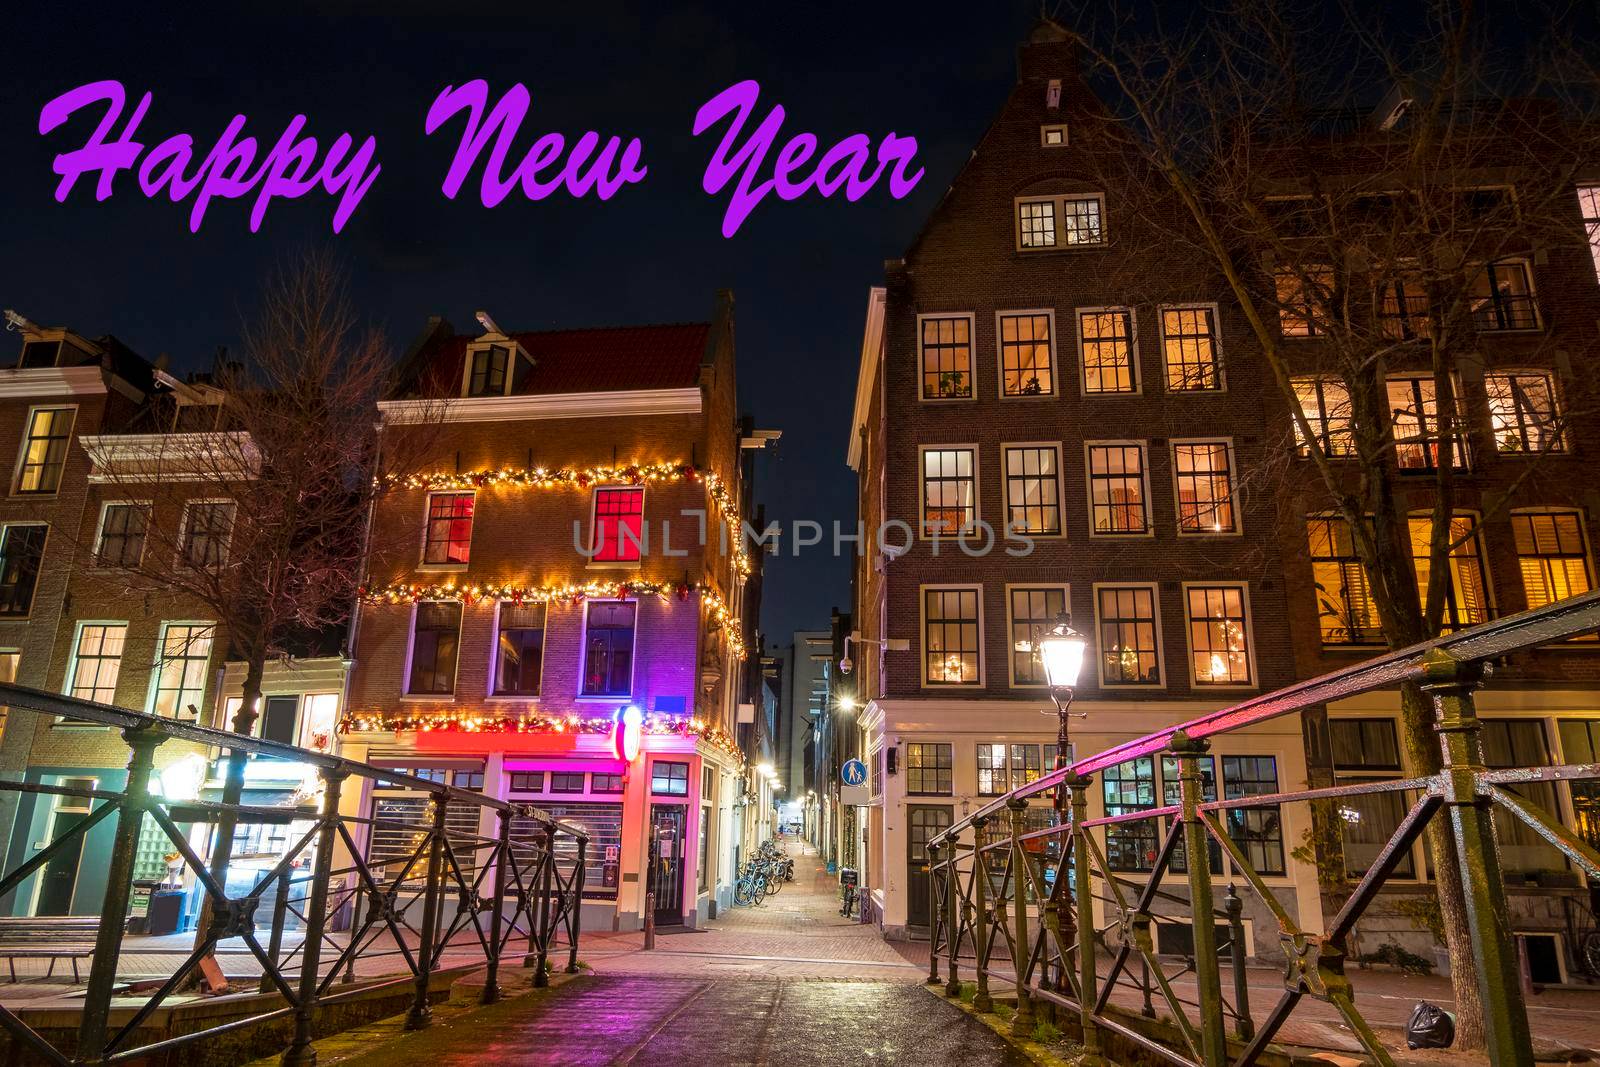 Happy New Year from Amsterdam in the Netherlands